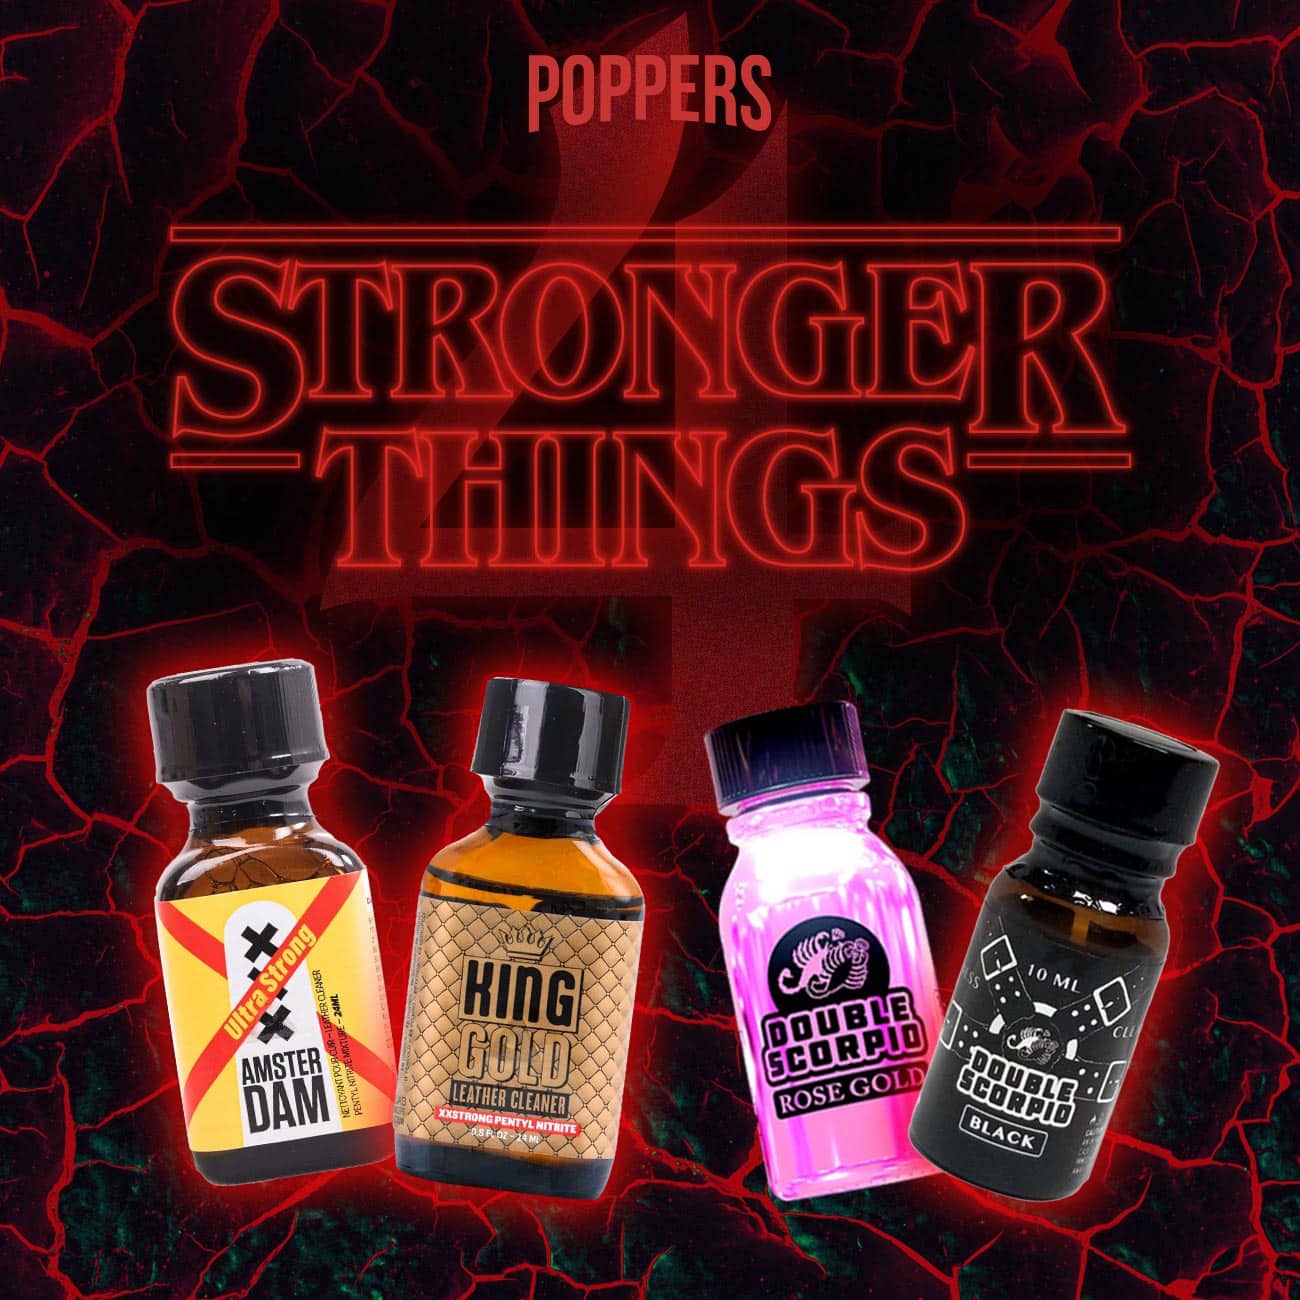 Unleash the power: stronger things 4 series poppers - intense sensations await with stronger things 4, king gold, double scorpio rose gold, and black.